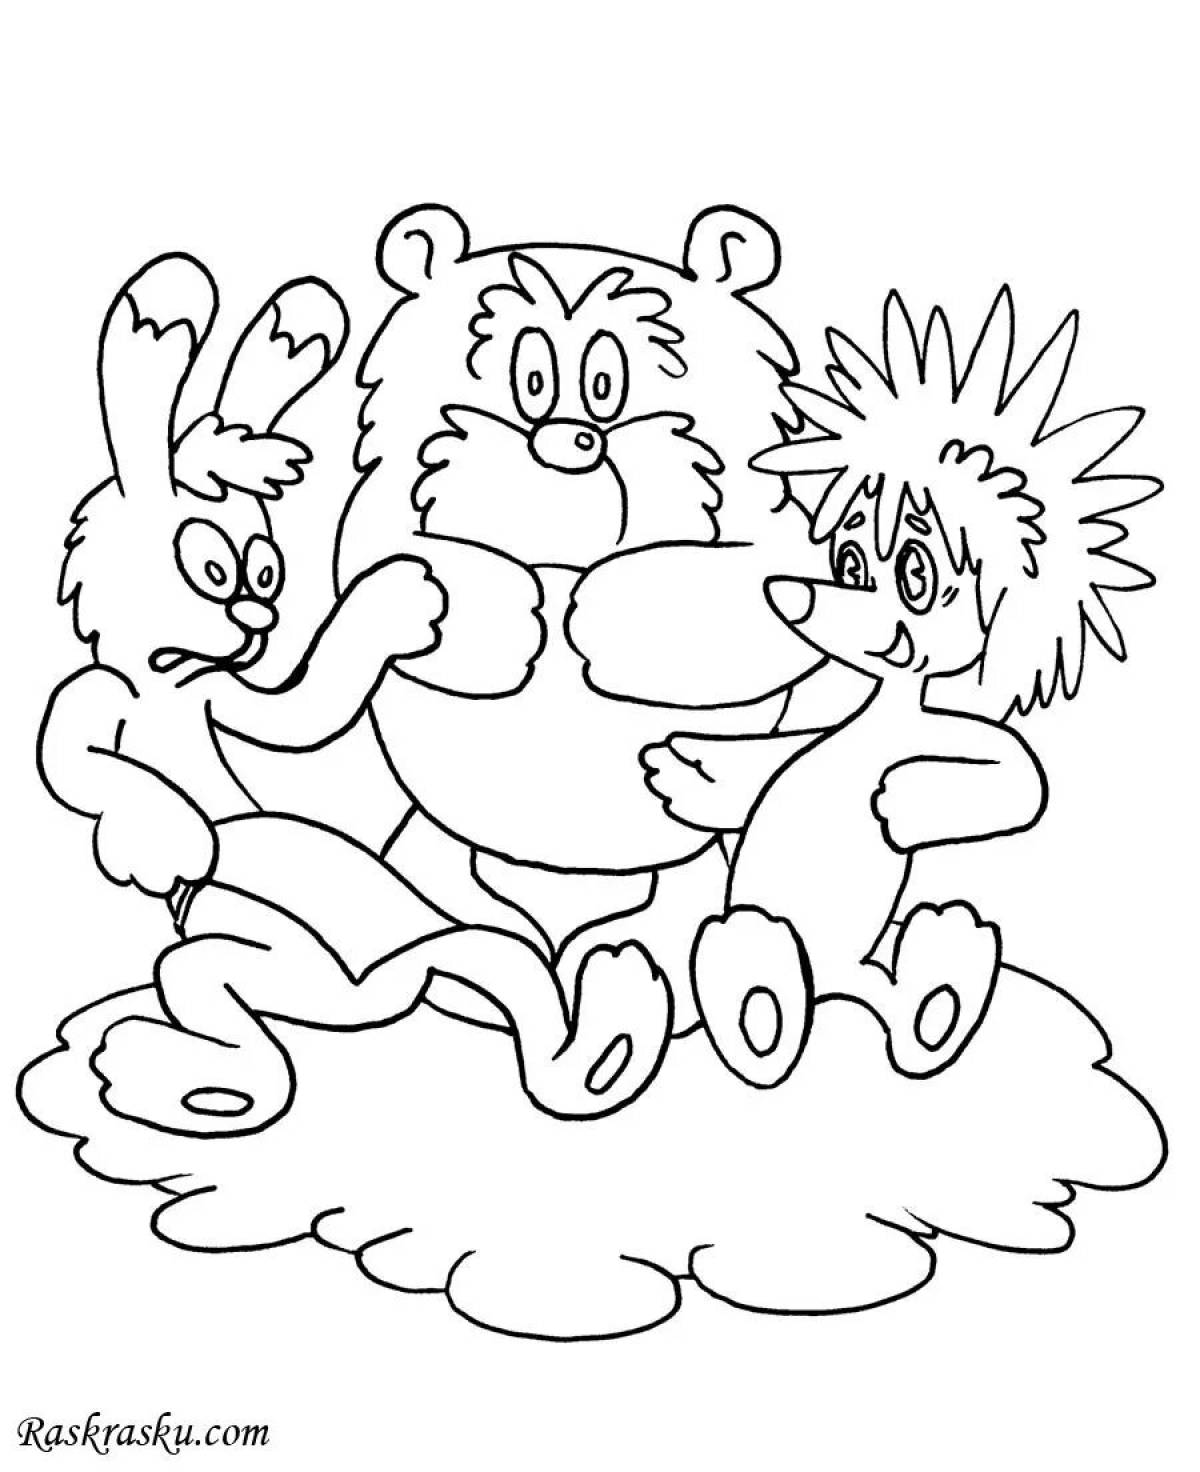 Hedgehog and teddy bear glitter coloring book